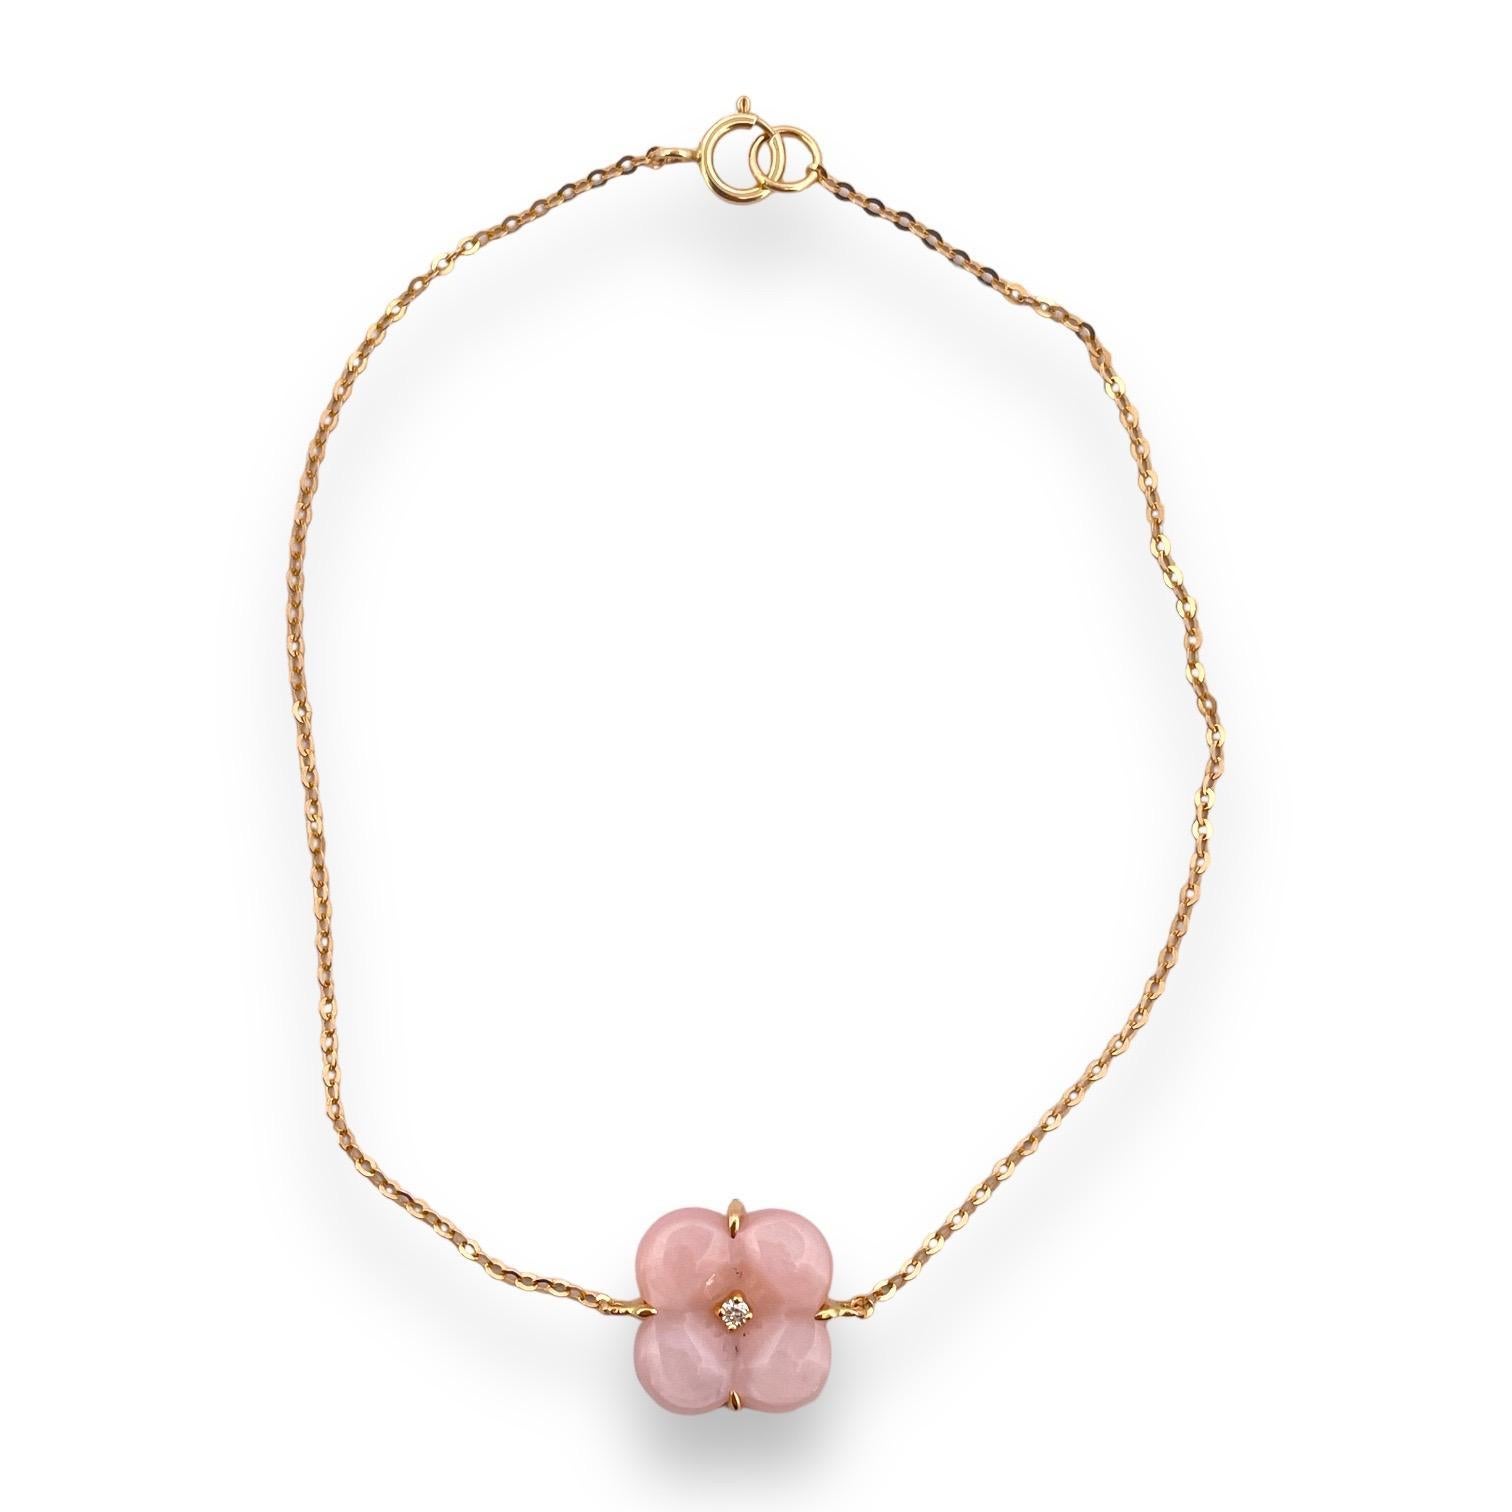 The 18K yellow gold rosy mother of pearl clover bracelet is a dazzling and refined accessory that seamlessly blends classic elegance style.
Crafted from solid 18-karat yellow gold, the bracelet features a series of clover motifs, each adorned with